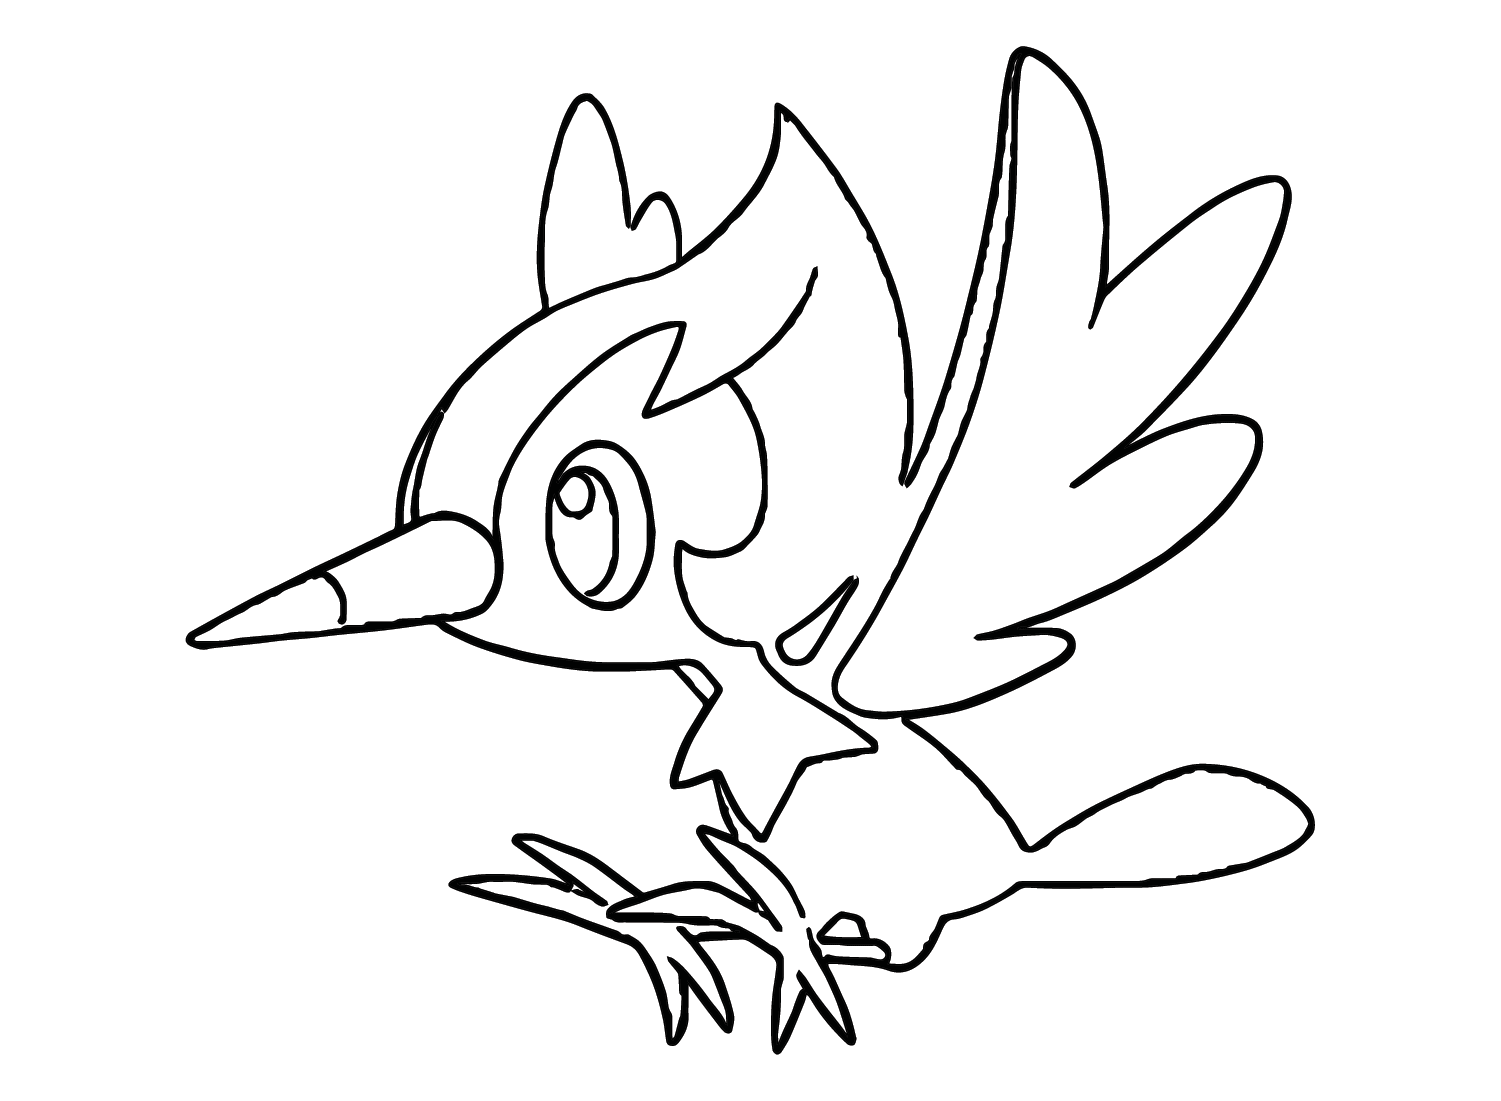 Pikipek to Color Coloring Page